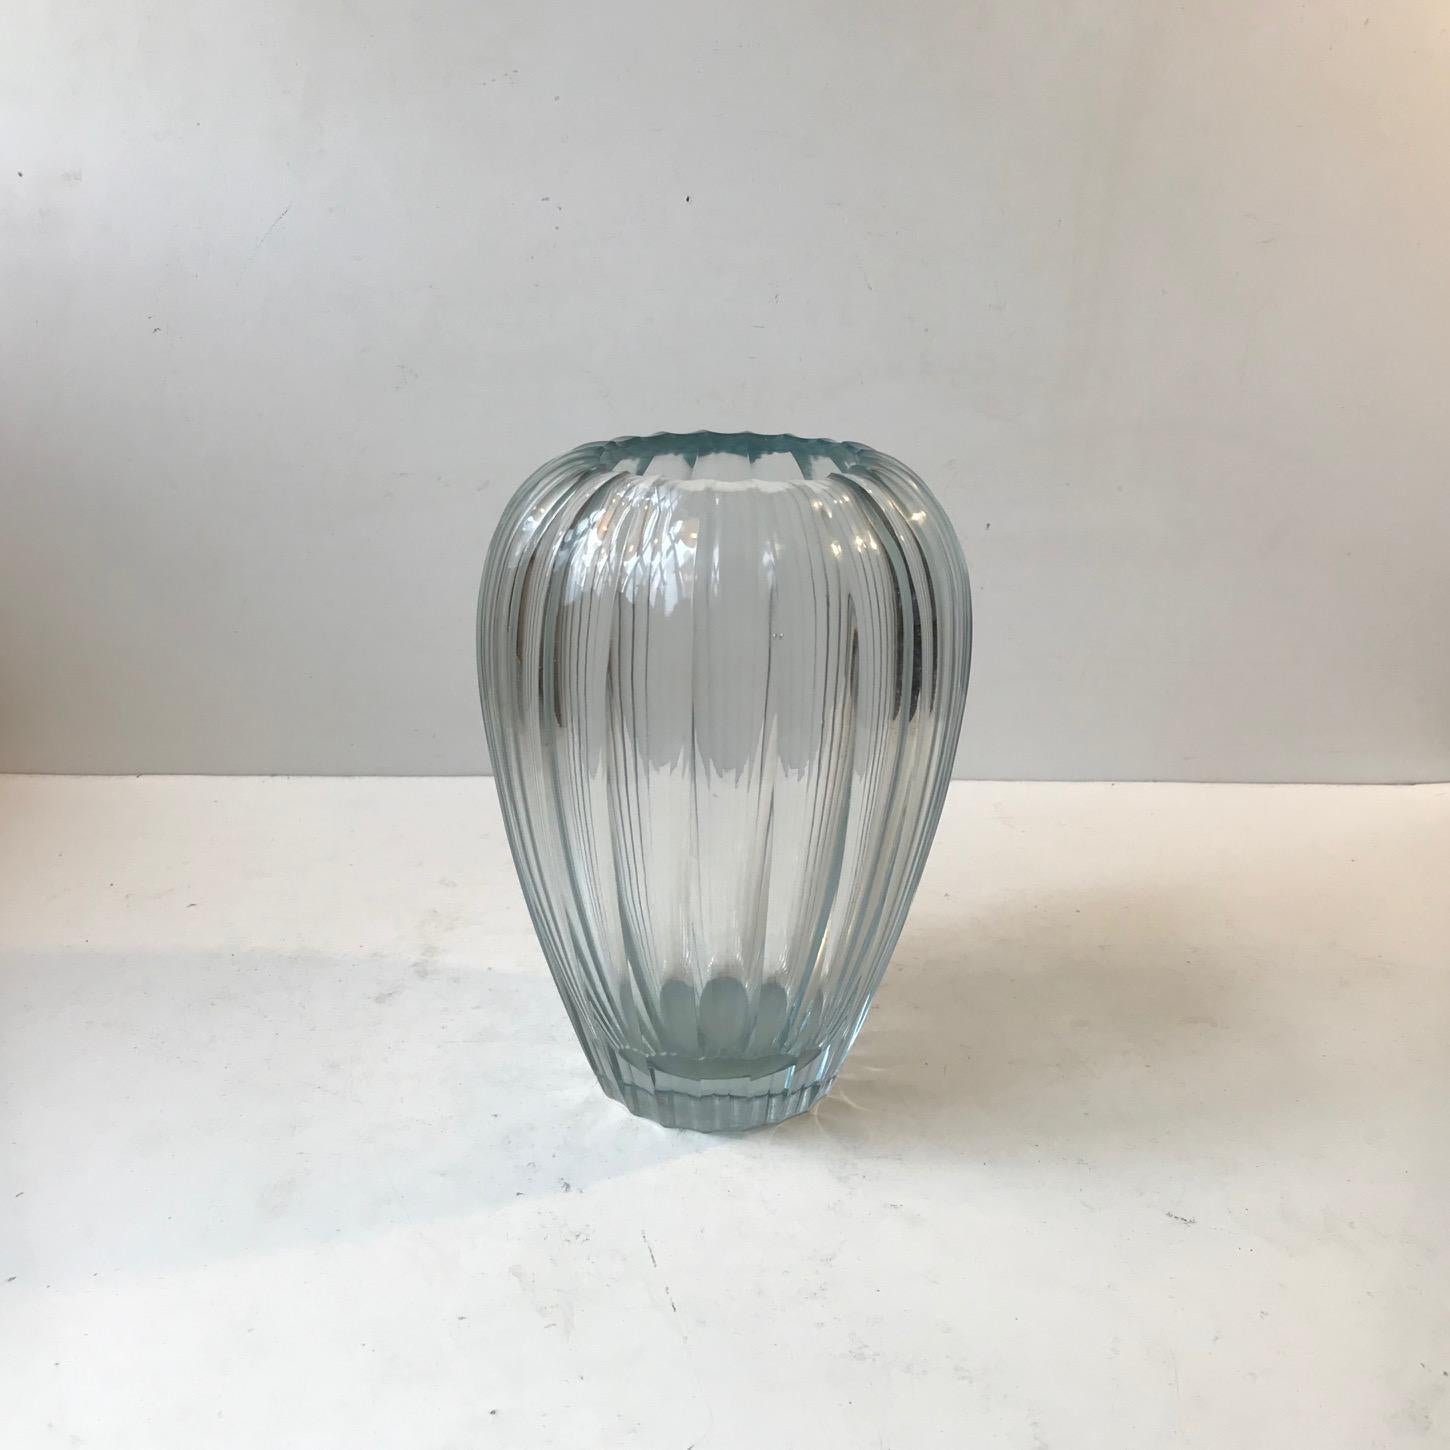 Important piece of Swedish art glass history. A Triton vase in vaguely blue tinted clear, multi-faceted, beveled and polished crystal glass. Designed in 1916 by Sculptor Simon Gate (1893-1945) and examples of this design was executed at Orrefors